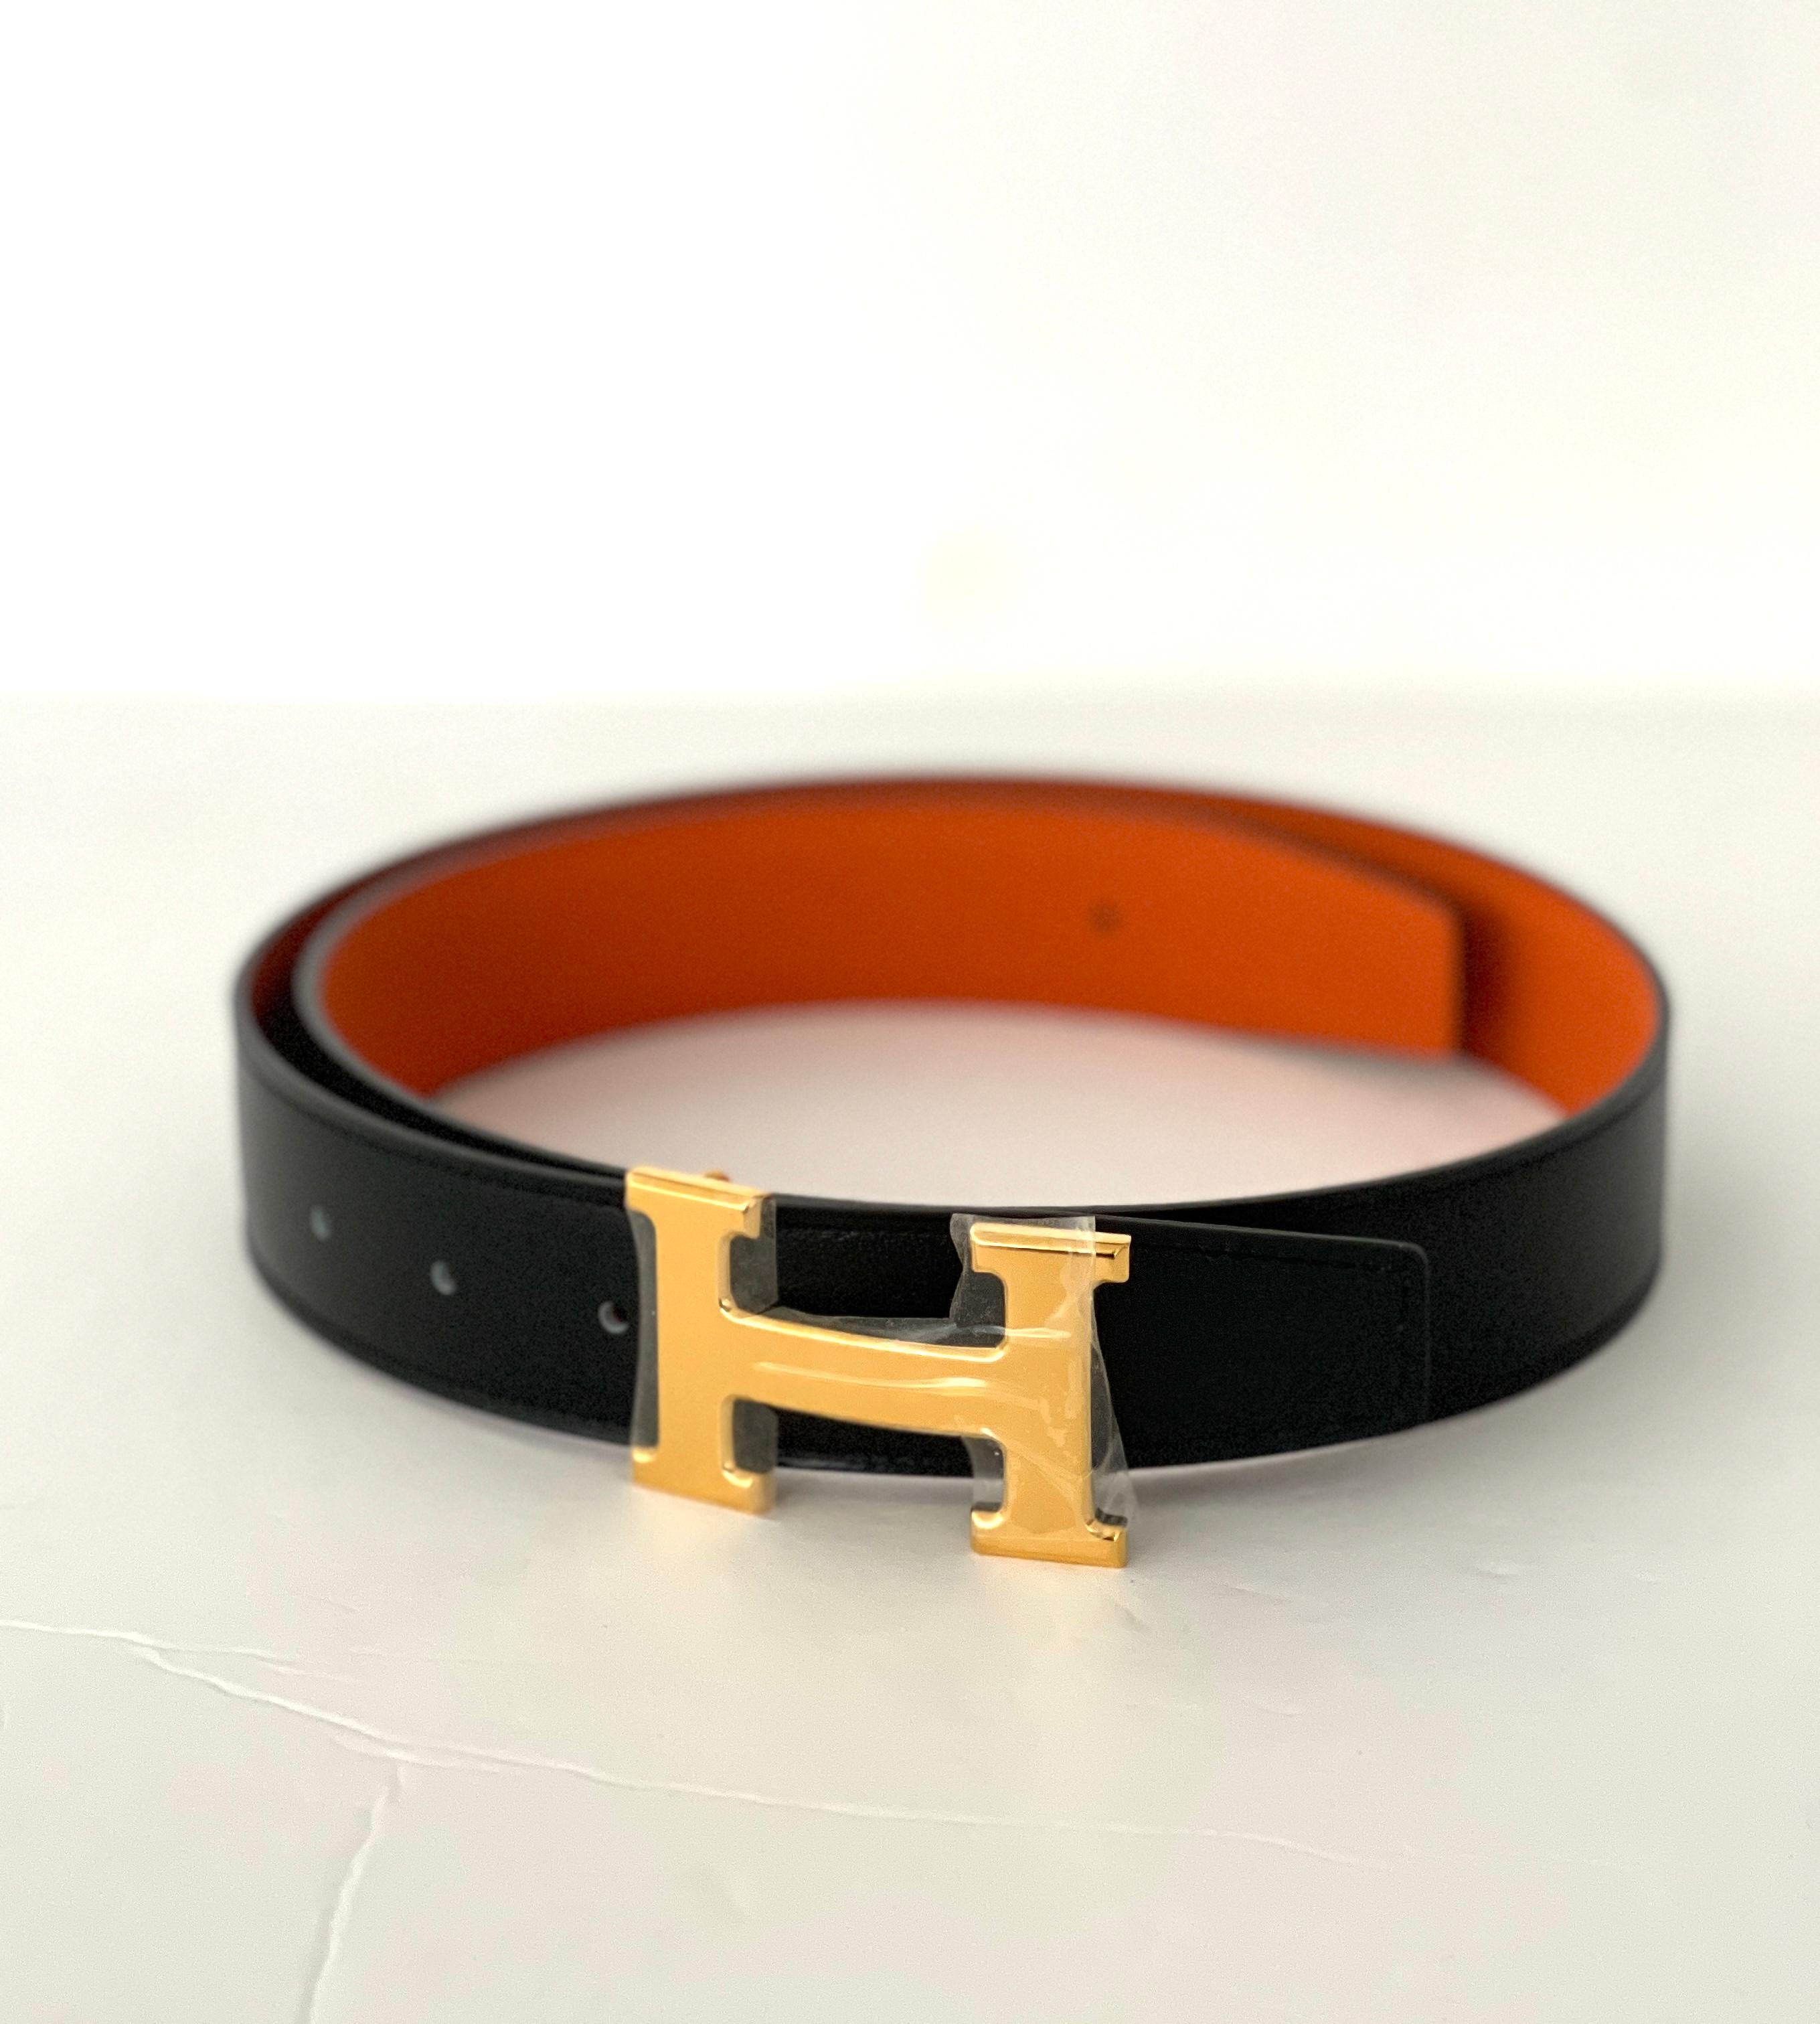 H belt buckle & Reversible leather strap 32 mm
Size is 85
Width is 1.3